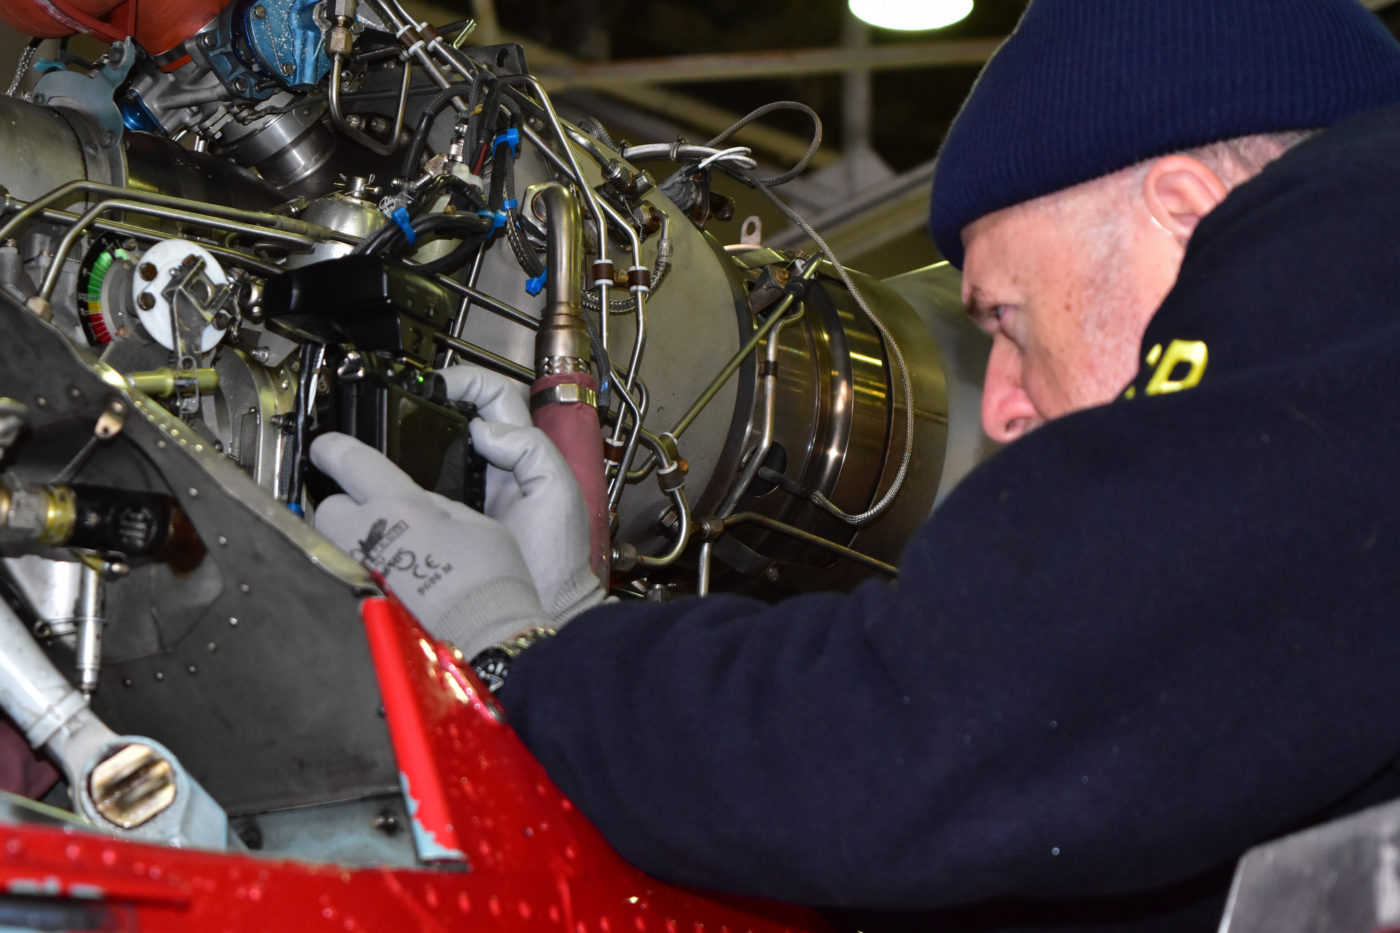 Harald Reichel of the NTSB’s Office of Aviation Safety examines the engine of a Liberty Helicopters AS30 B2 that crashed in the East River on March 11, 2018. Chris O’Neil/NTSB Photo